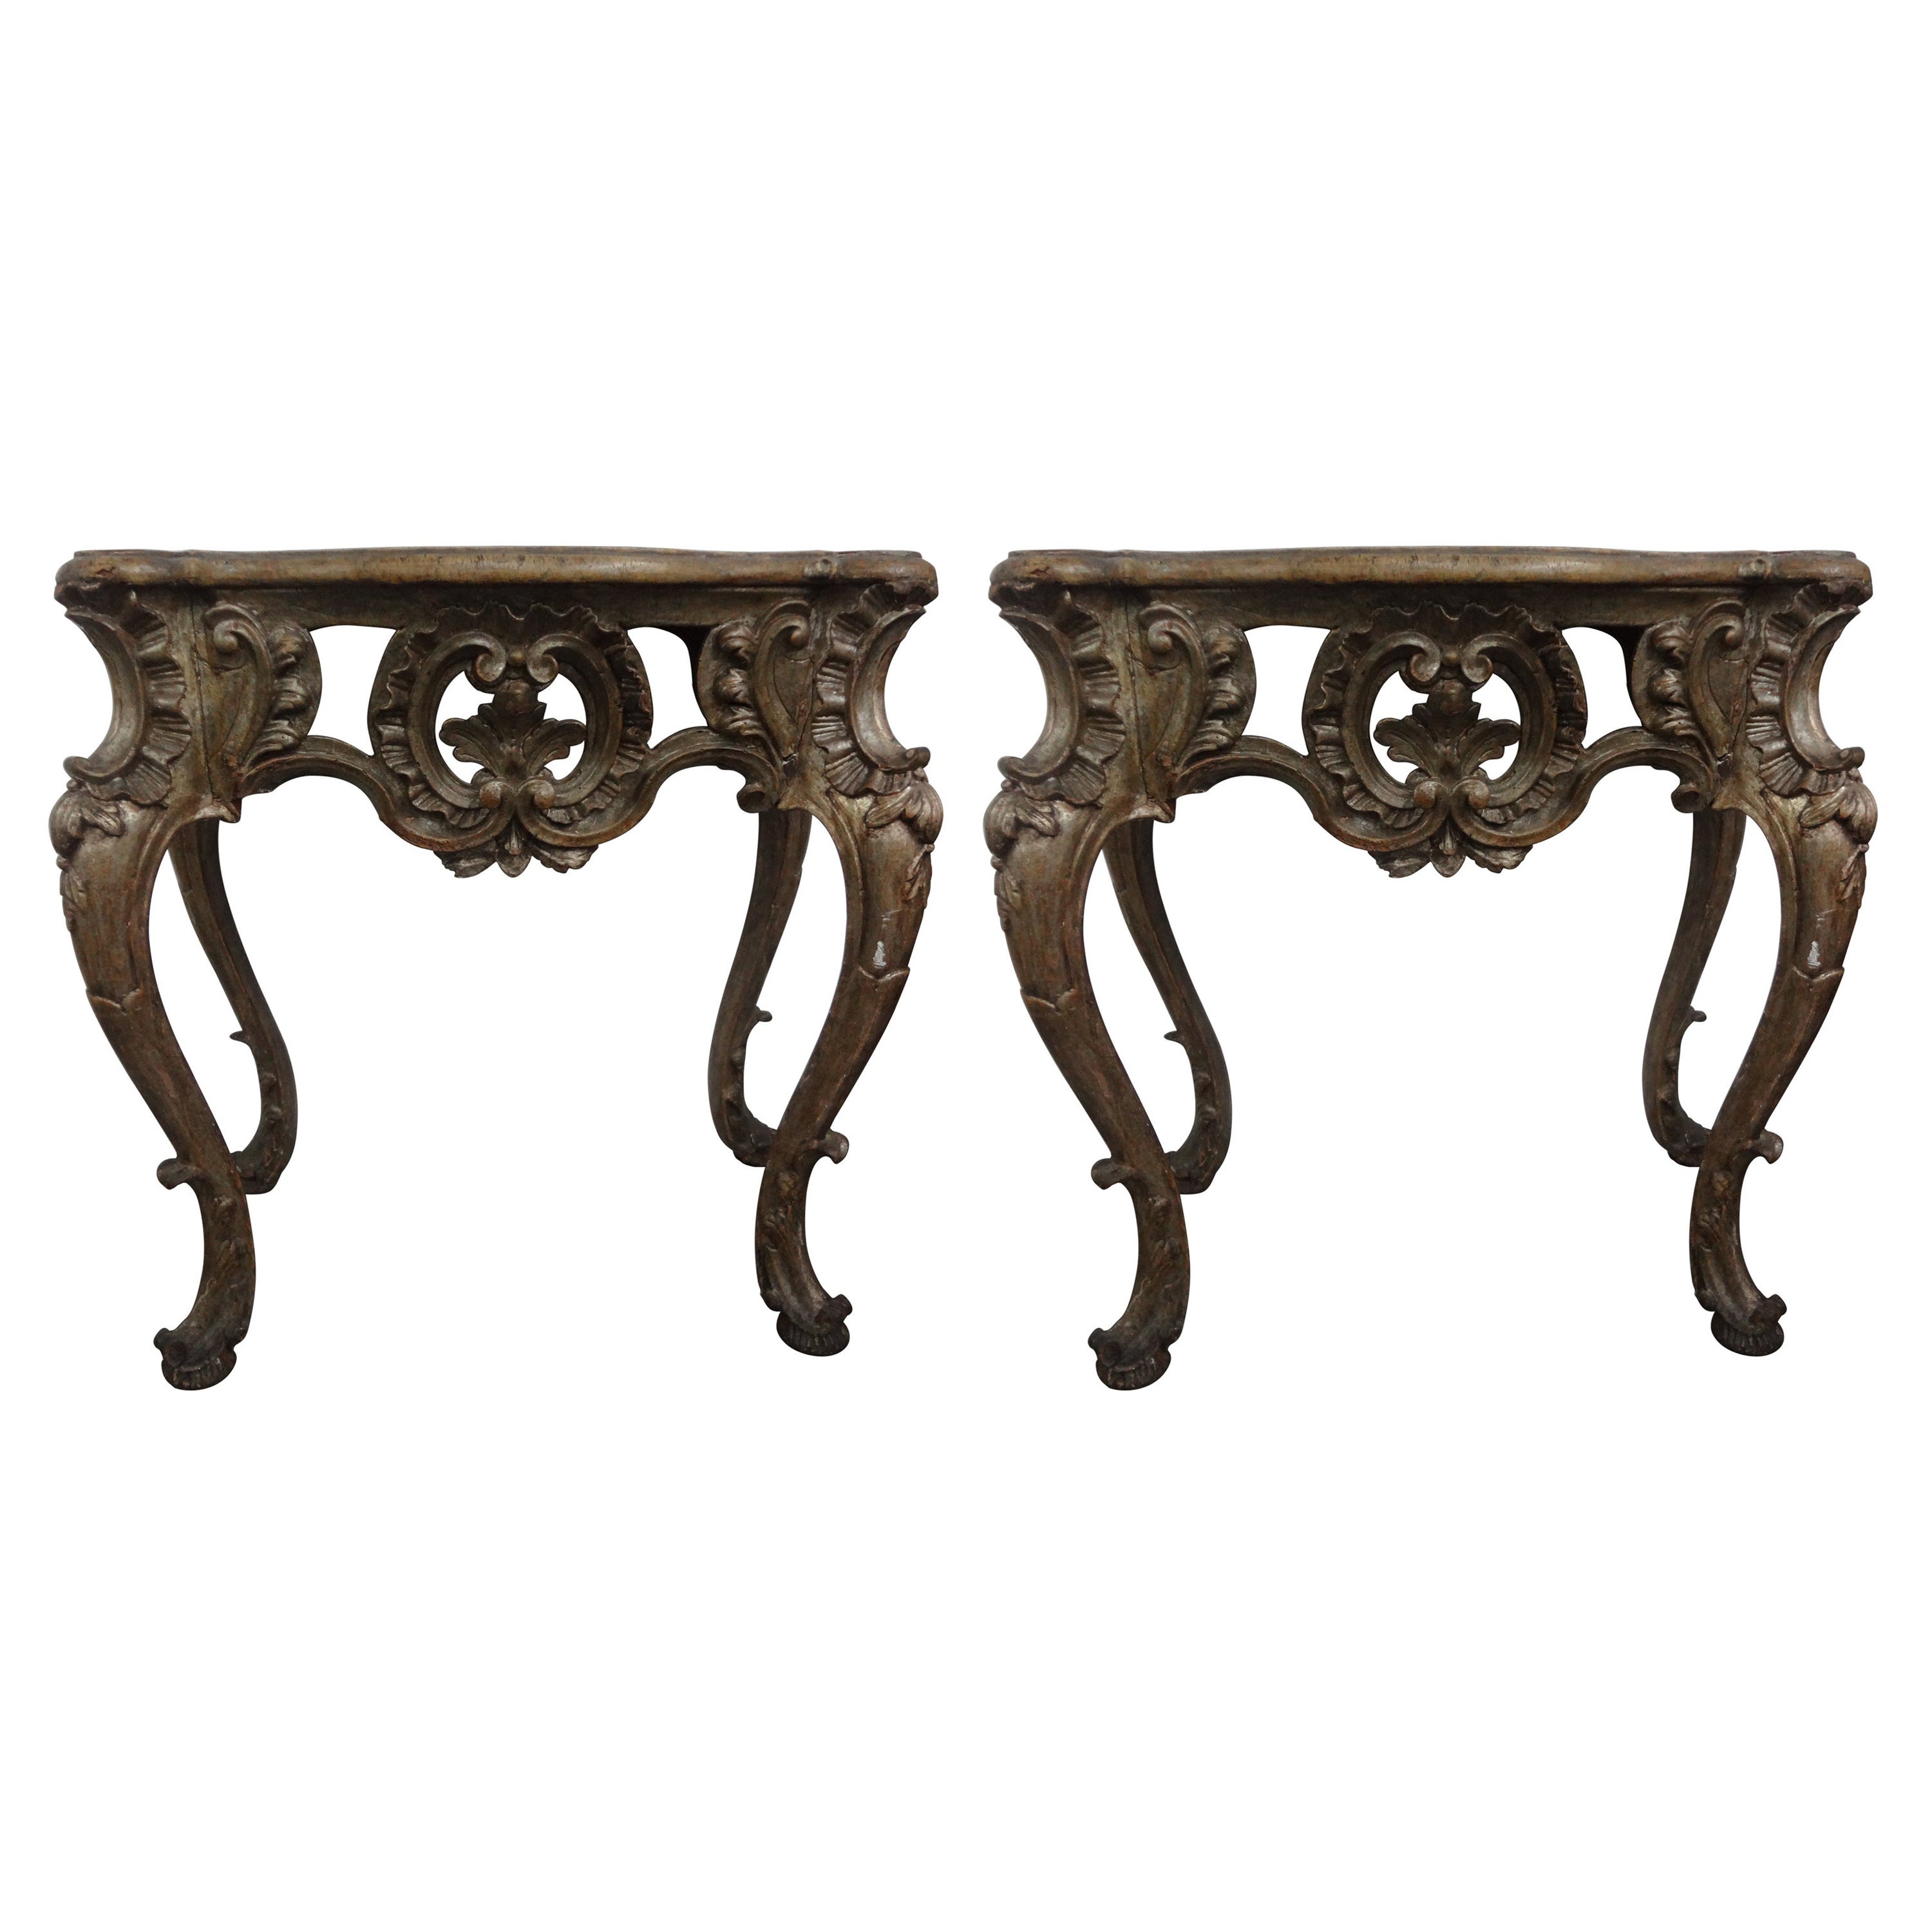 Pair Of 18th Century Italian Baroque Giltwood Console Tables For Sale